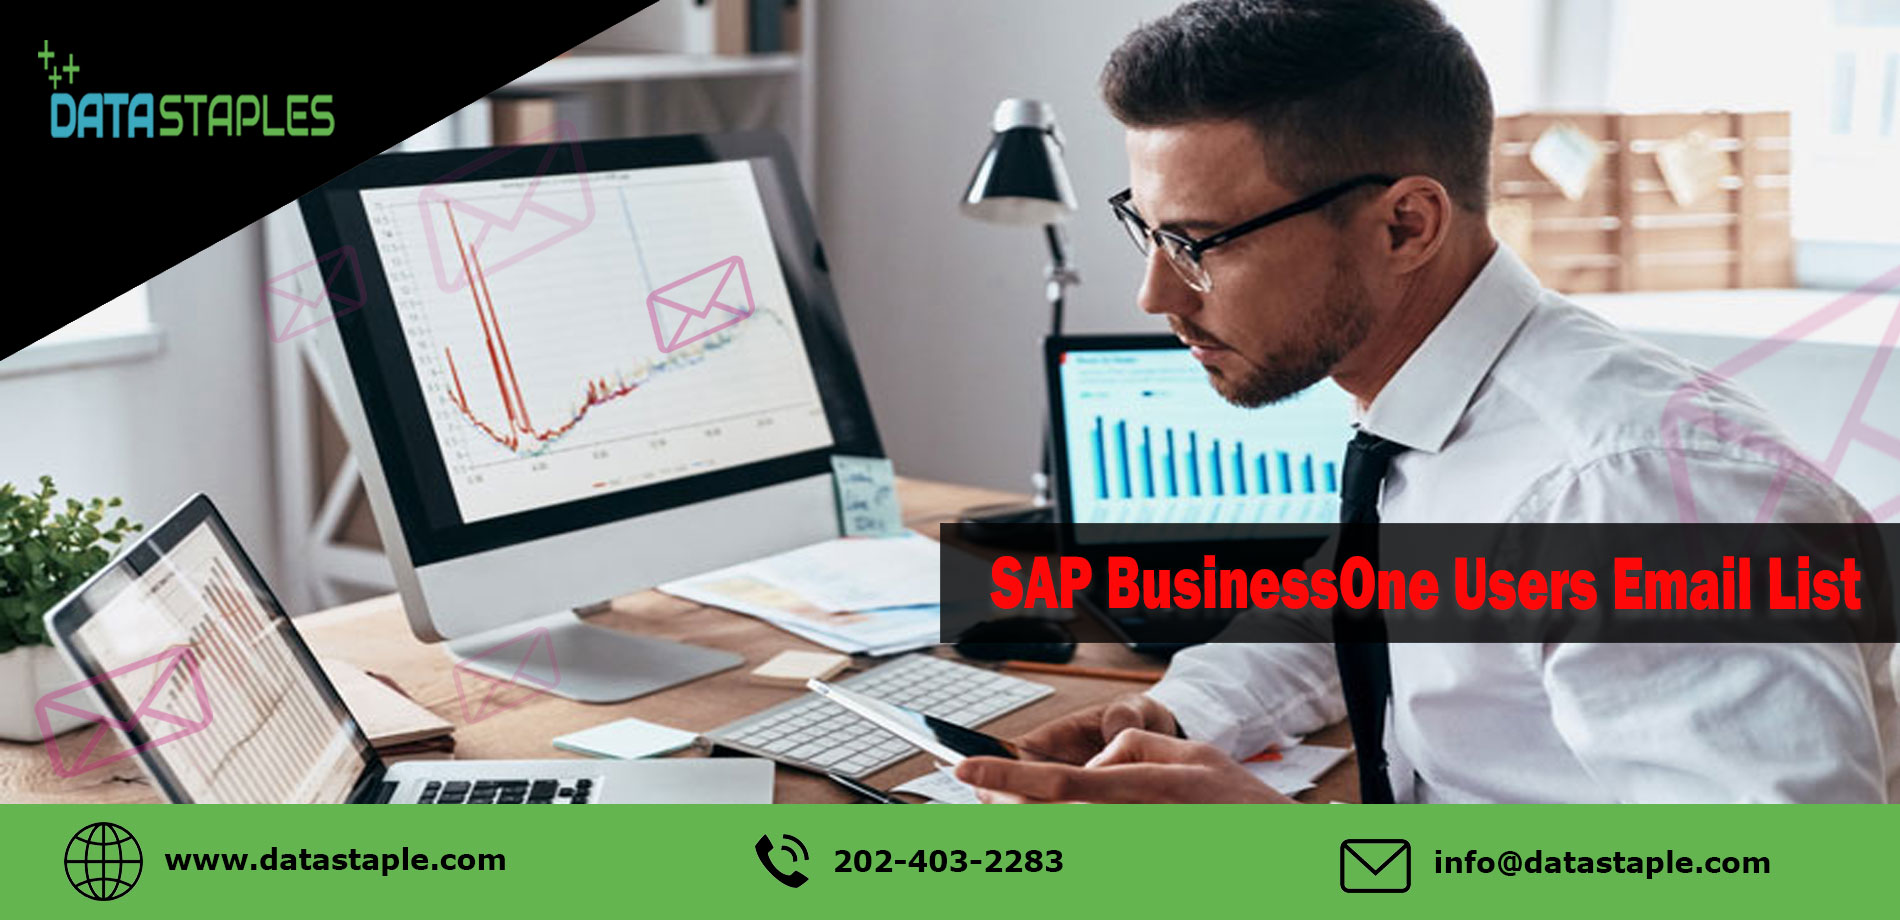 SAP Business One Users Email List | DataStaples